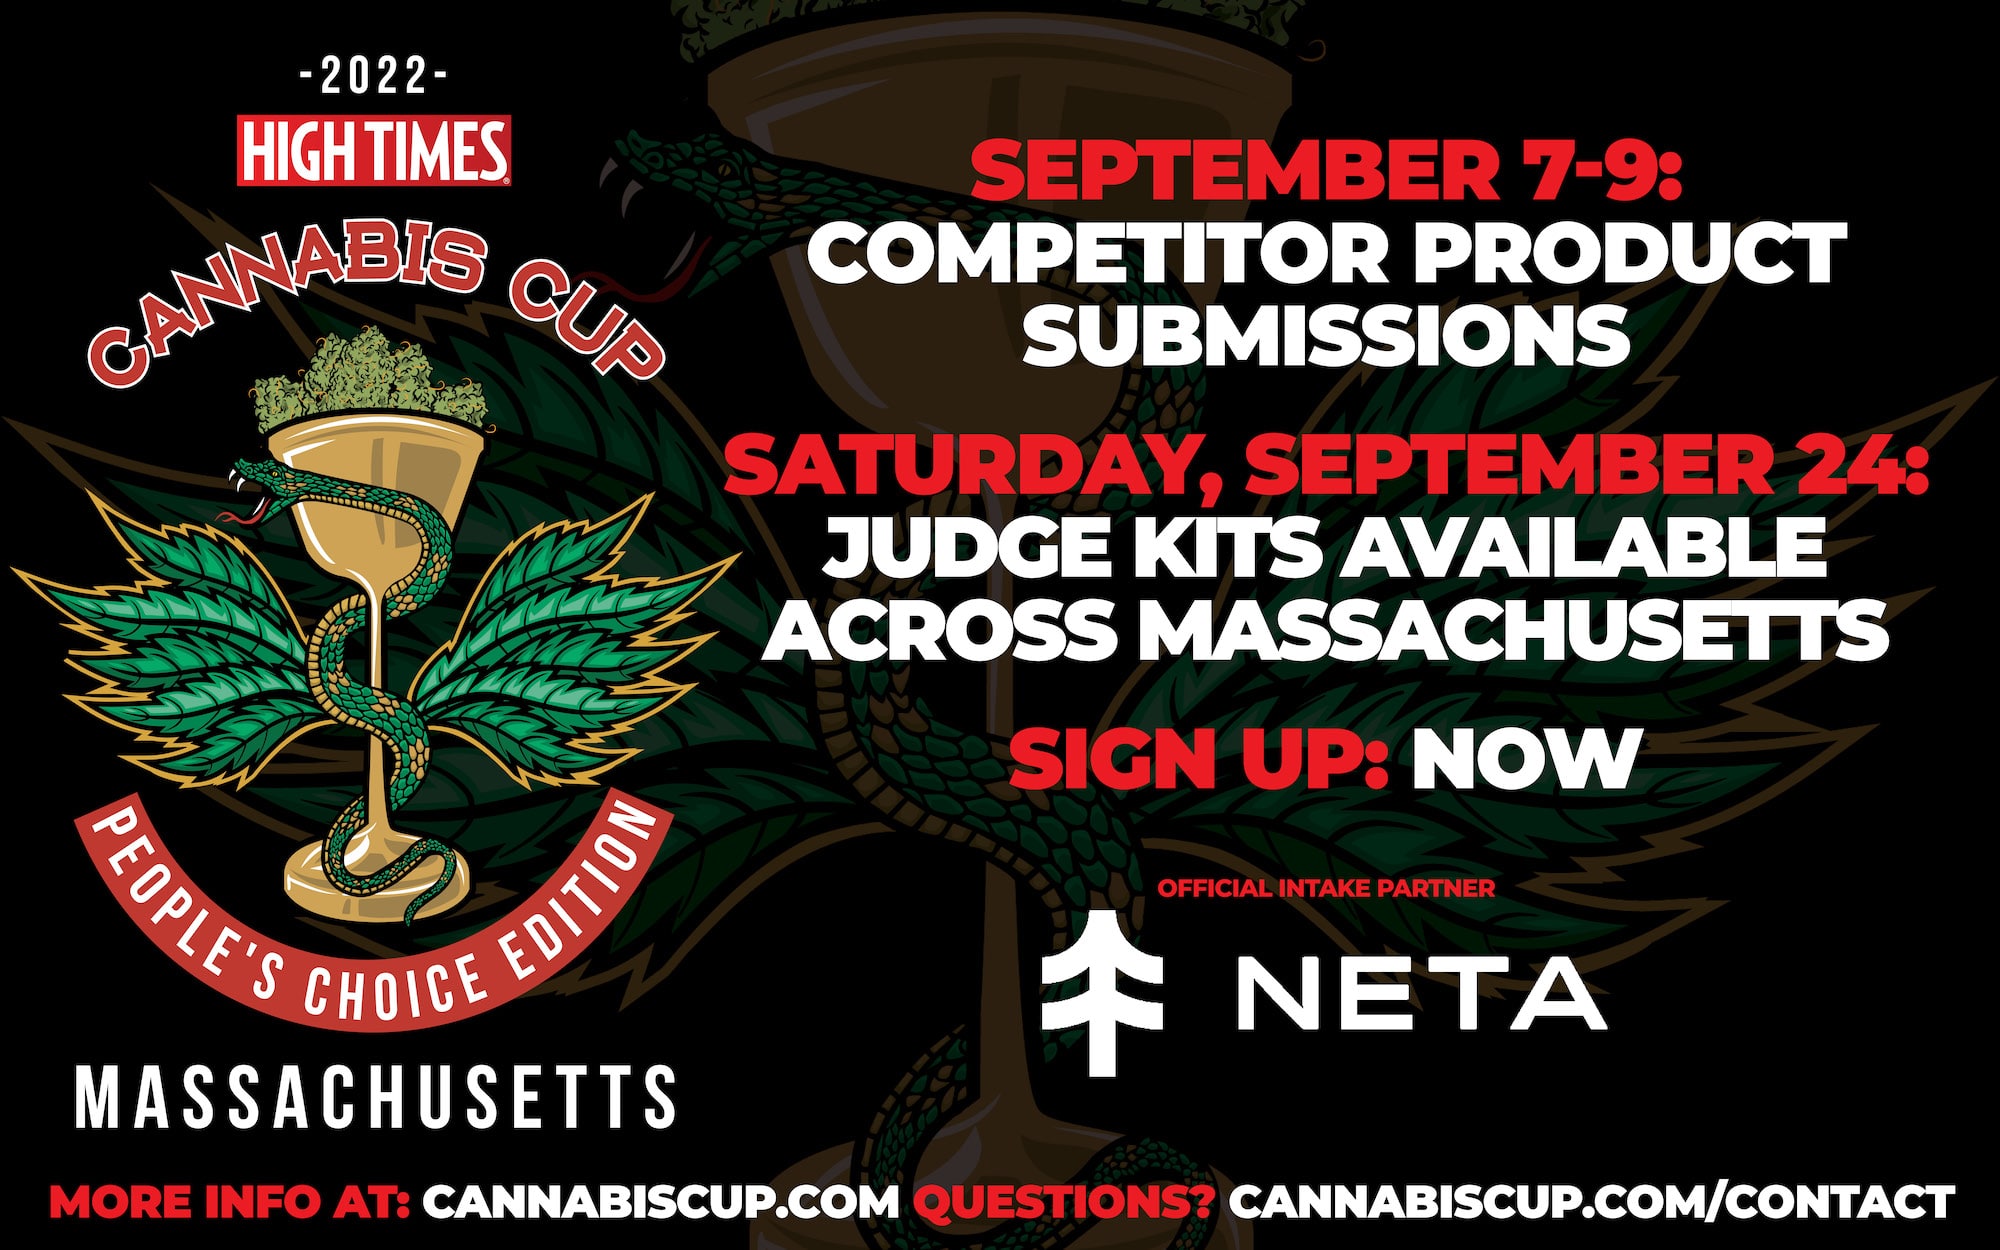 Just Announced – High Times Cannabis Cup Massachusetts: People’s Choice Edition 2022